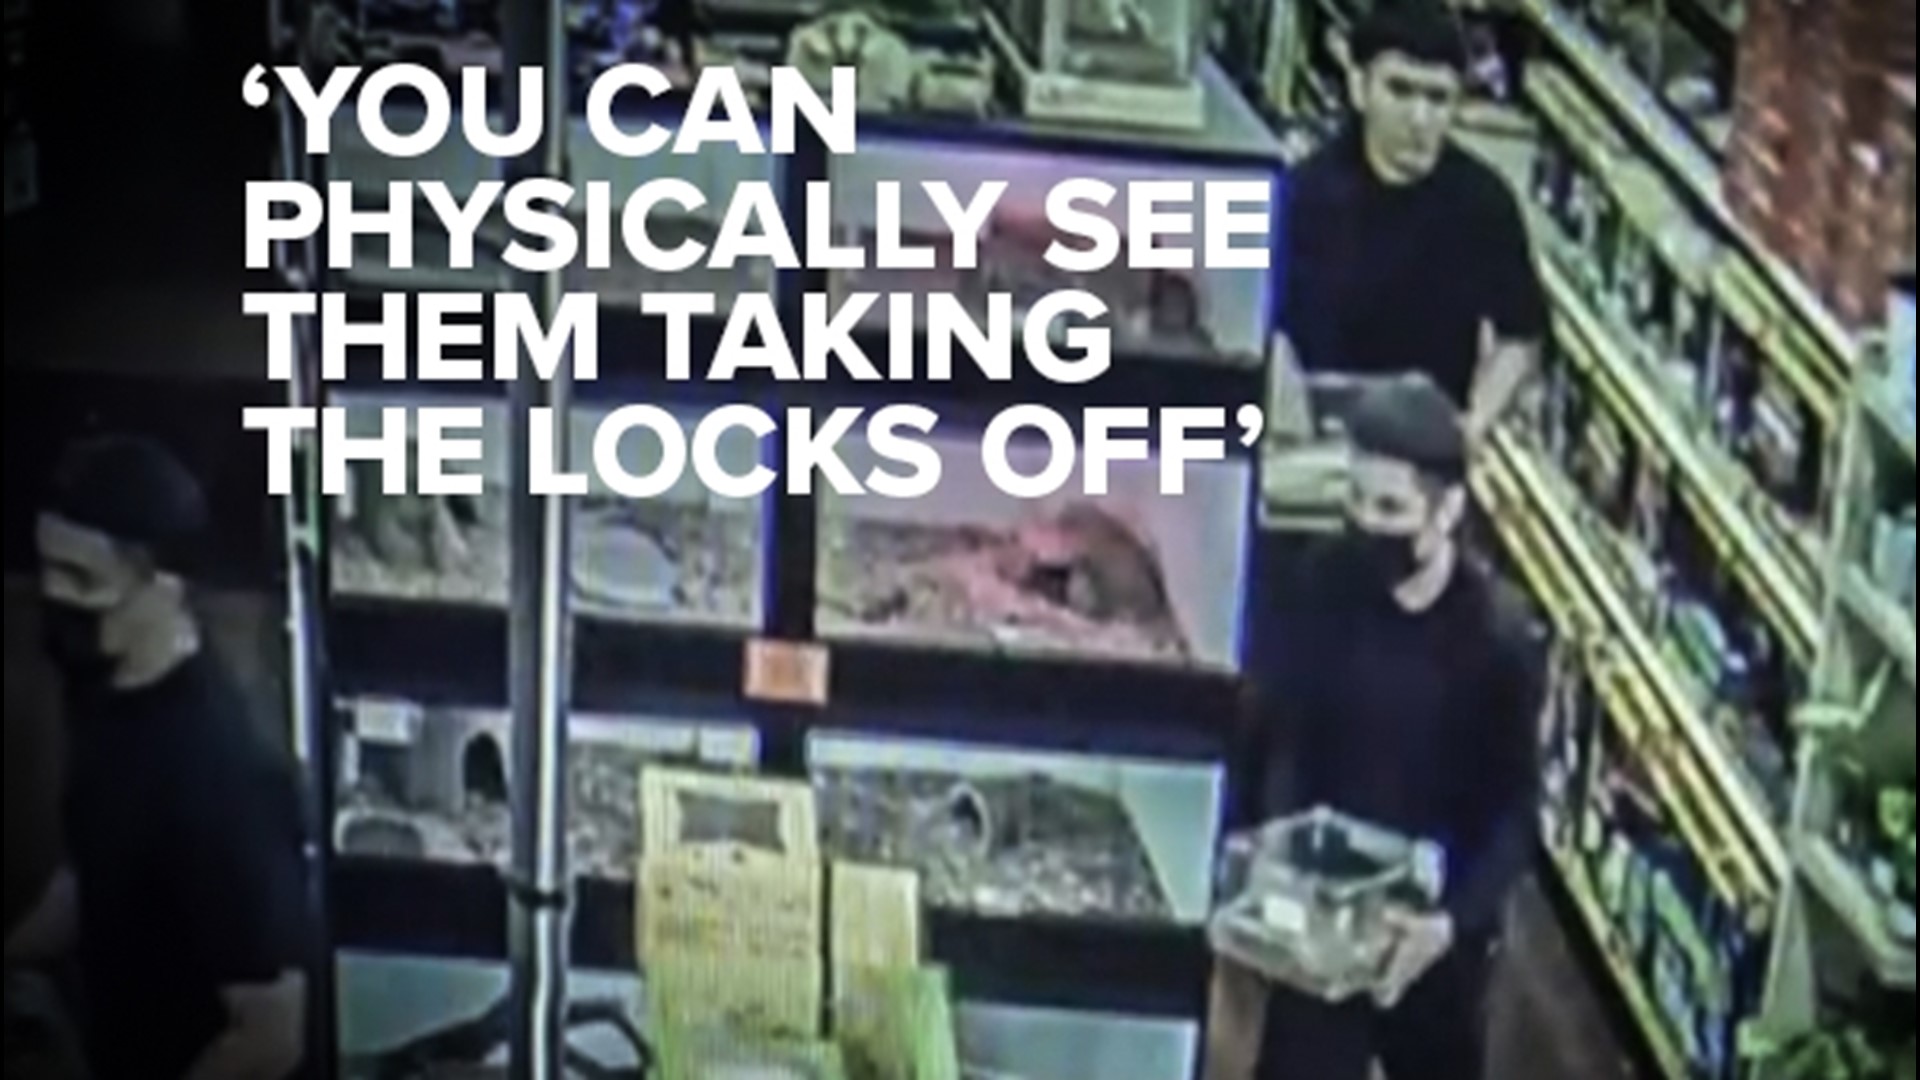 Police are looking for three suspects who stole expensive Ball Pythons valued at up to $2,000 from Carter's Pet Mart.